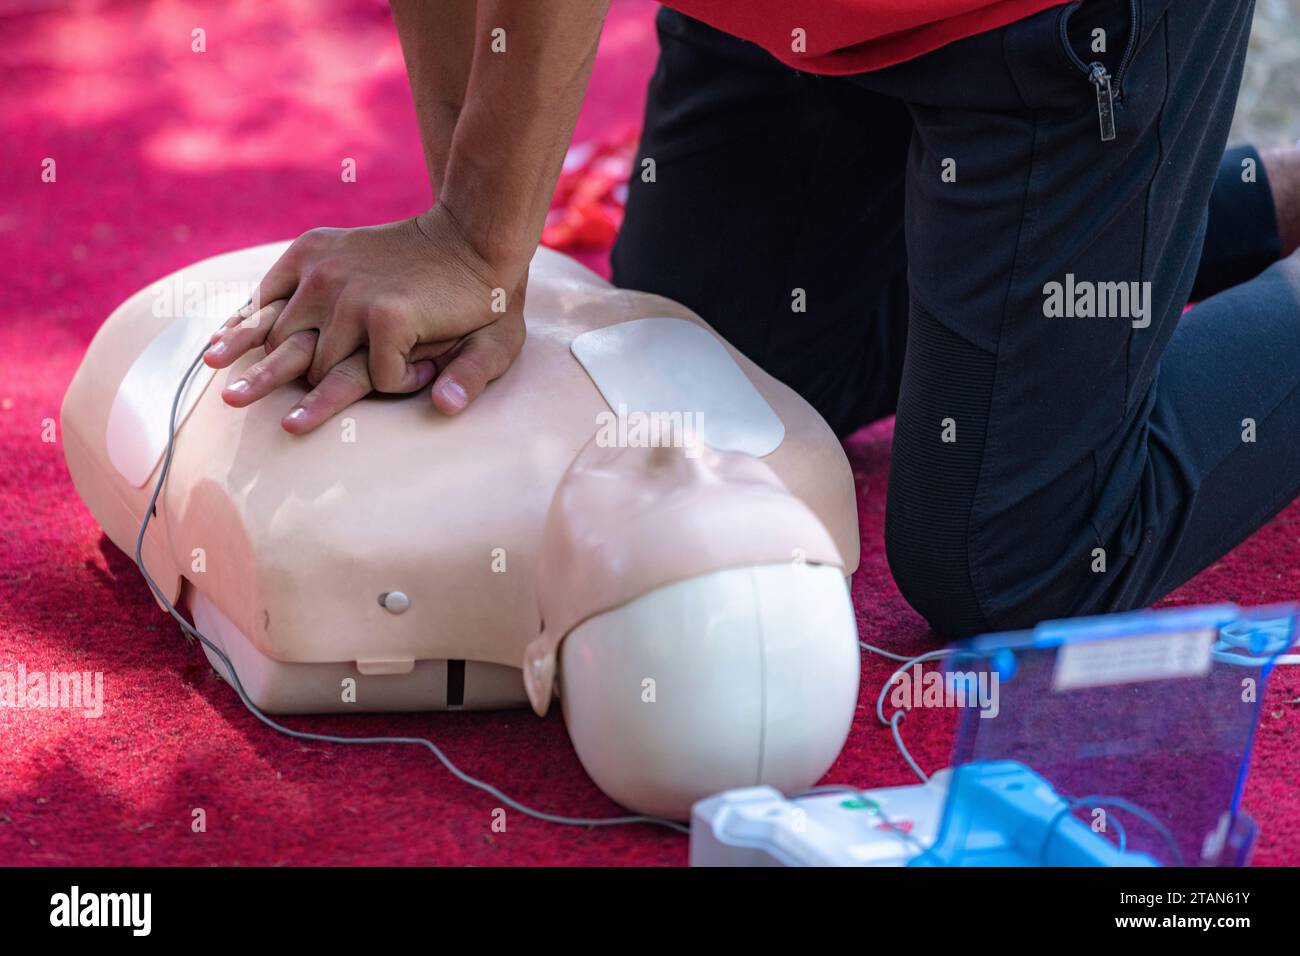 First aid CPR training Stock Photo